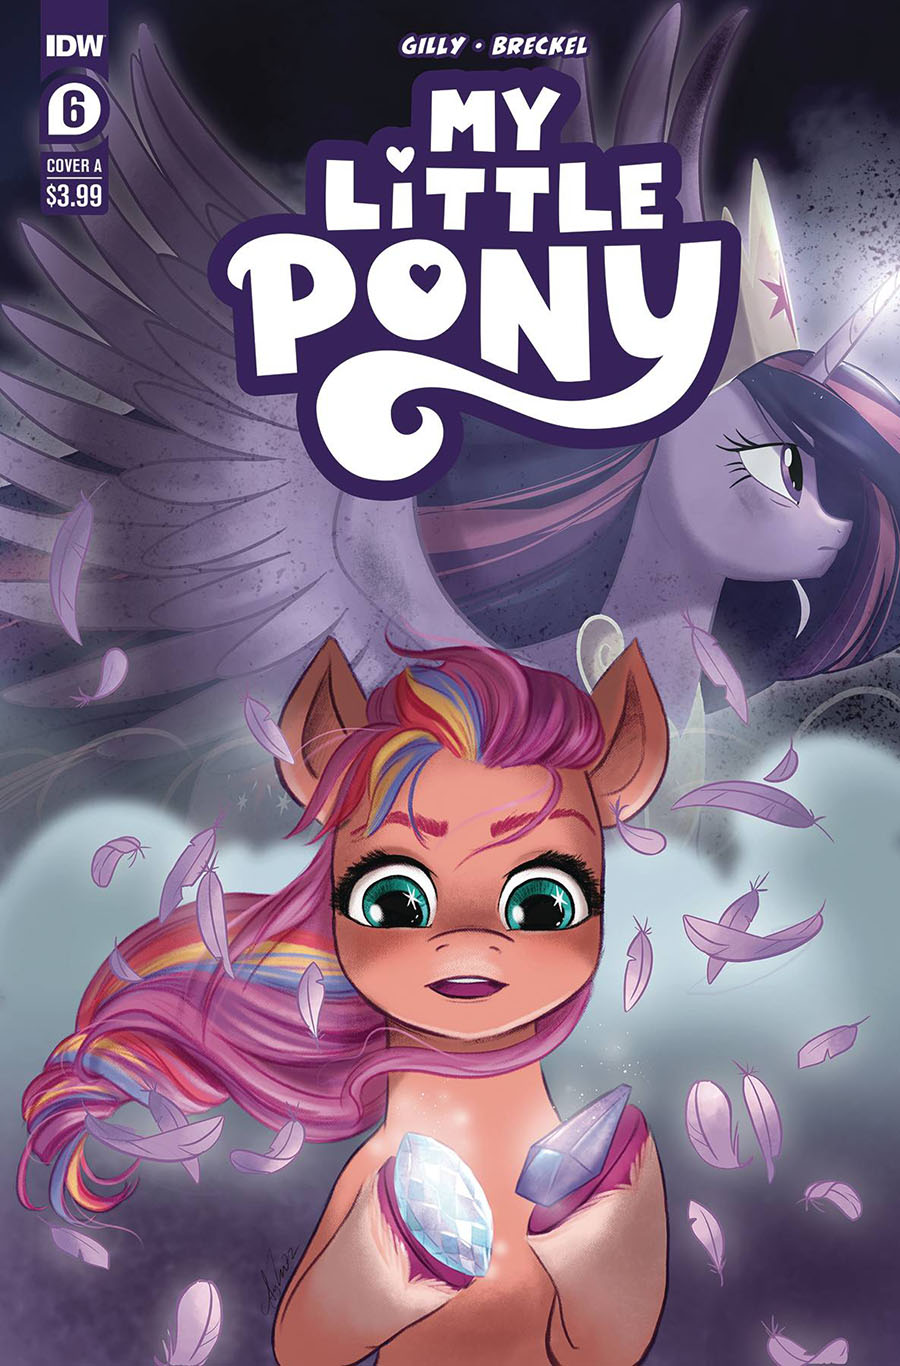 My Little Pony #6 Cover A Regular Amy Mebberson Cover